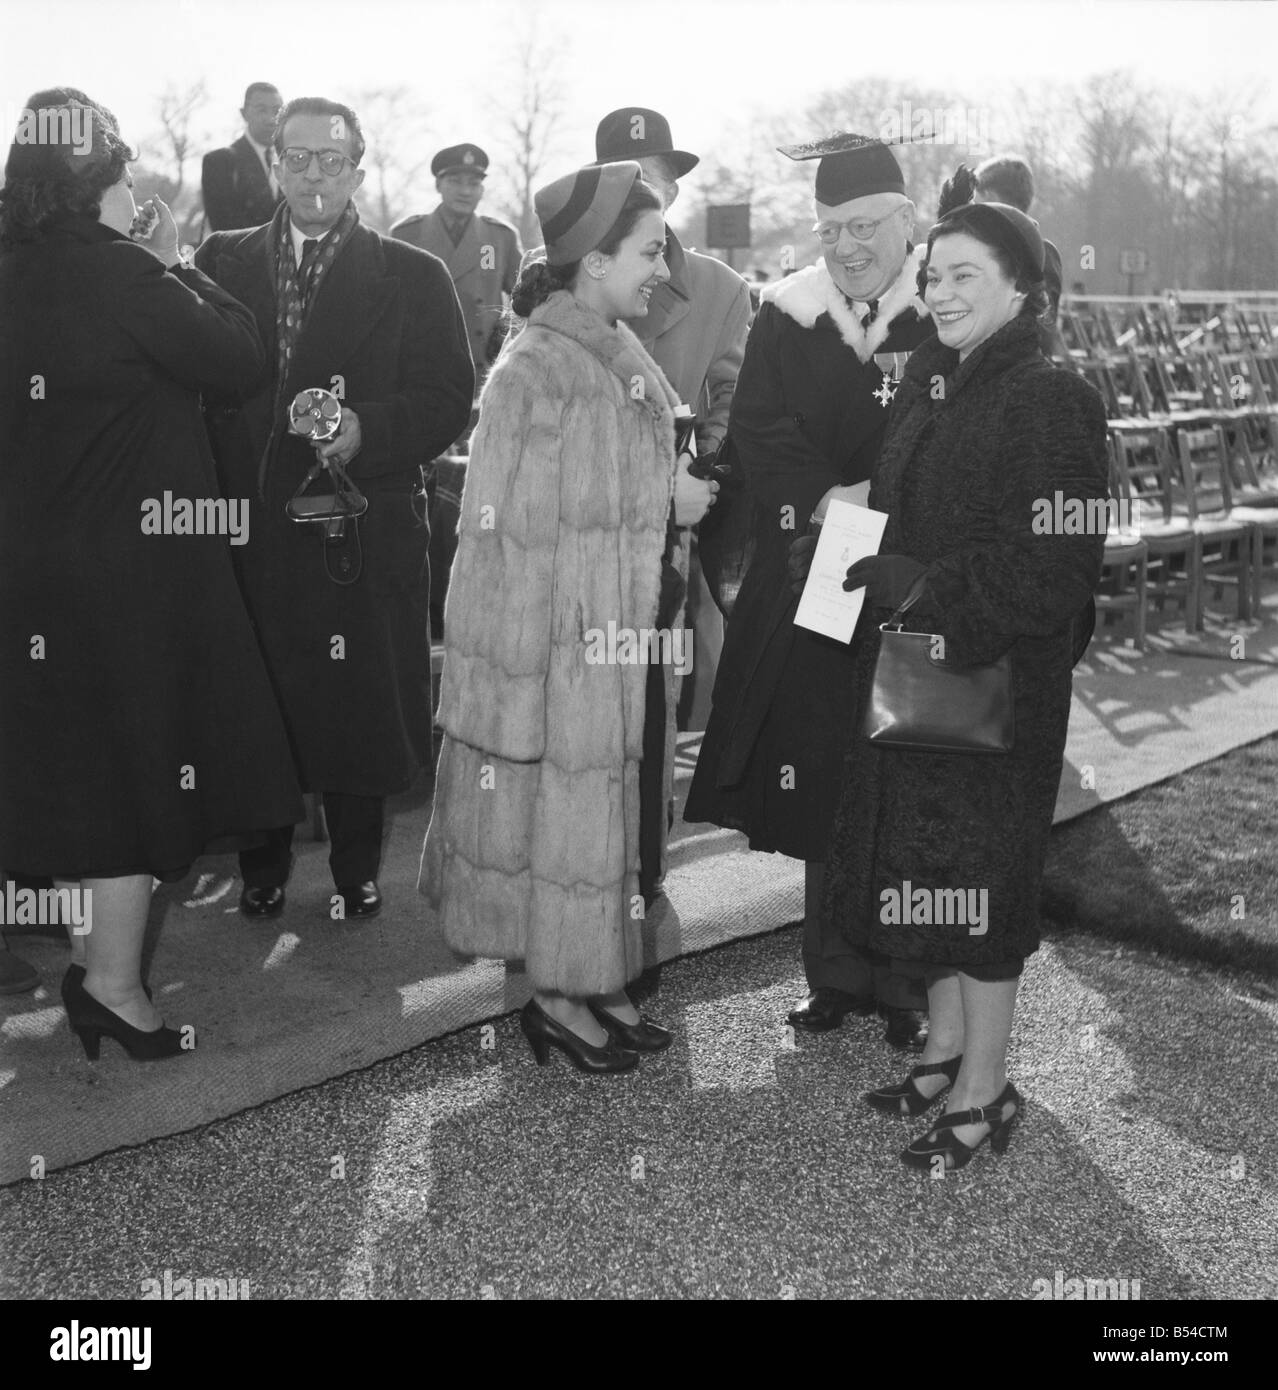 Royal family of Jordan welcomed by British guards at Sandhurst. &#13;&#10;February 1953 &#13;&#10;D632-001 Stock Photo